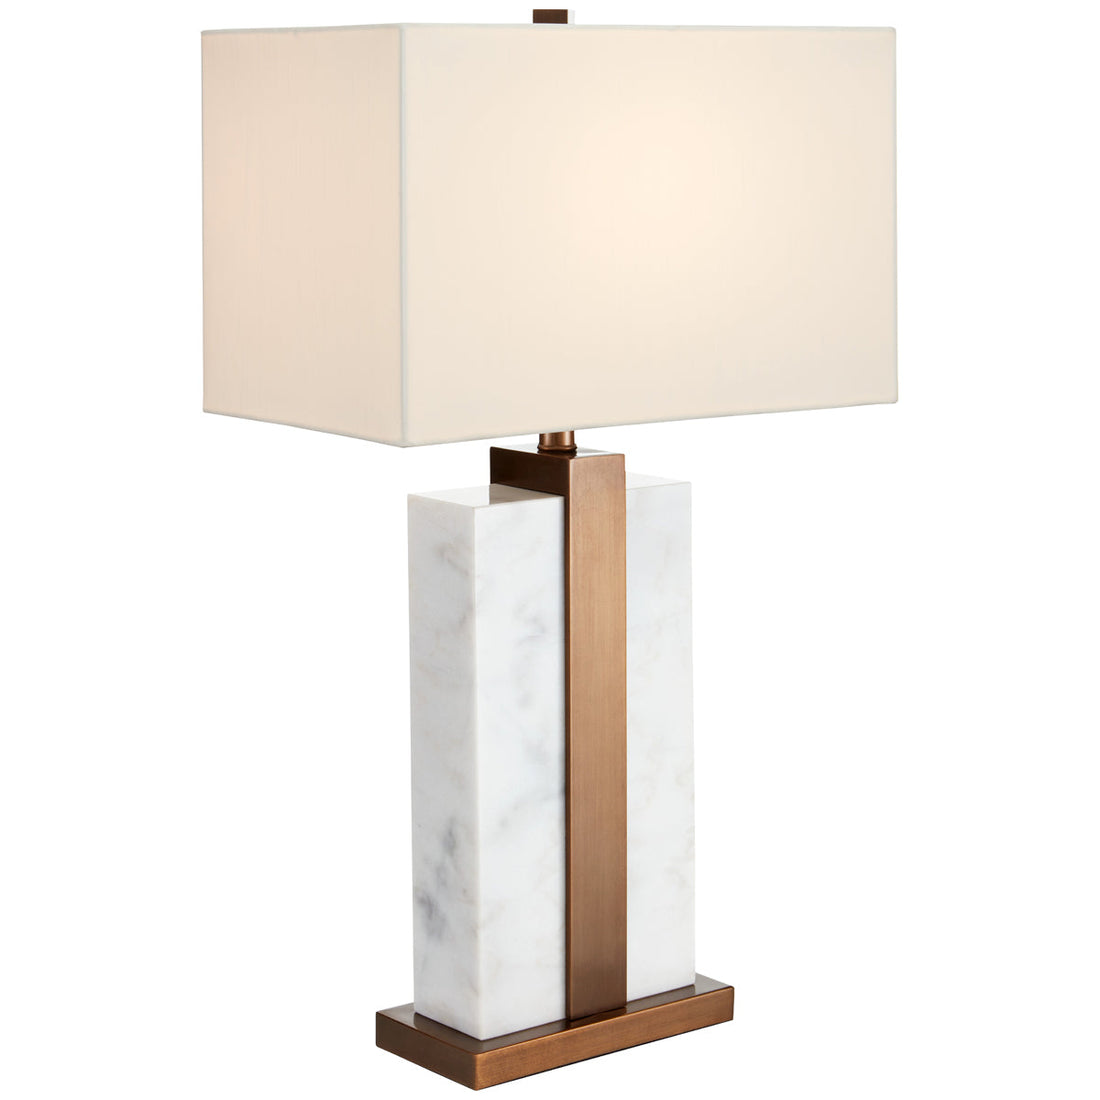 Currey and Company Catriona Table Lamp